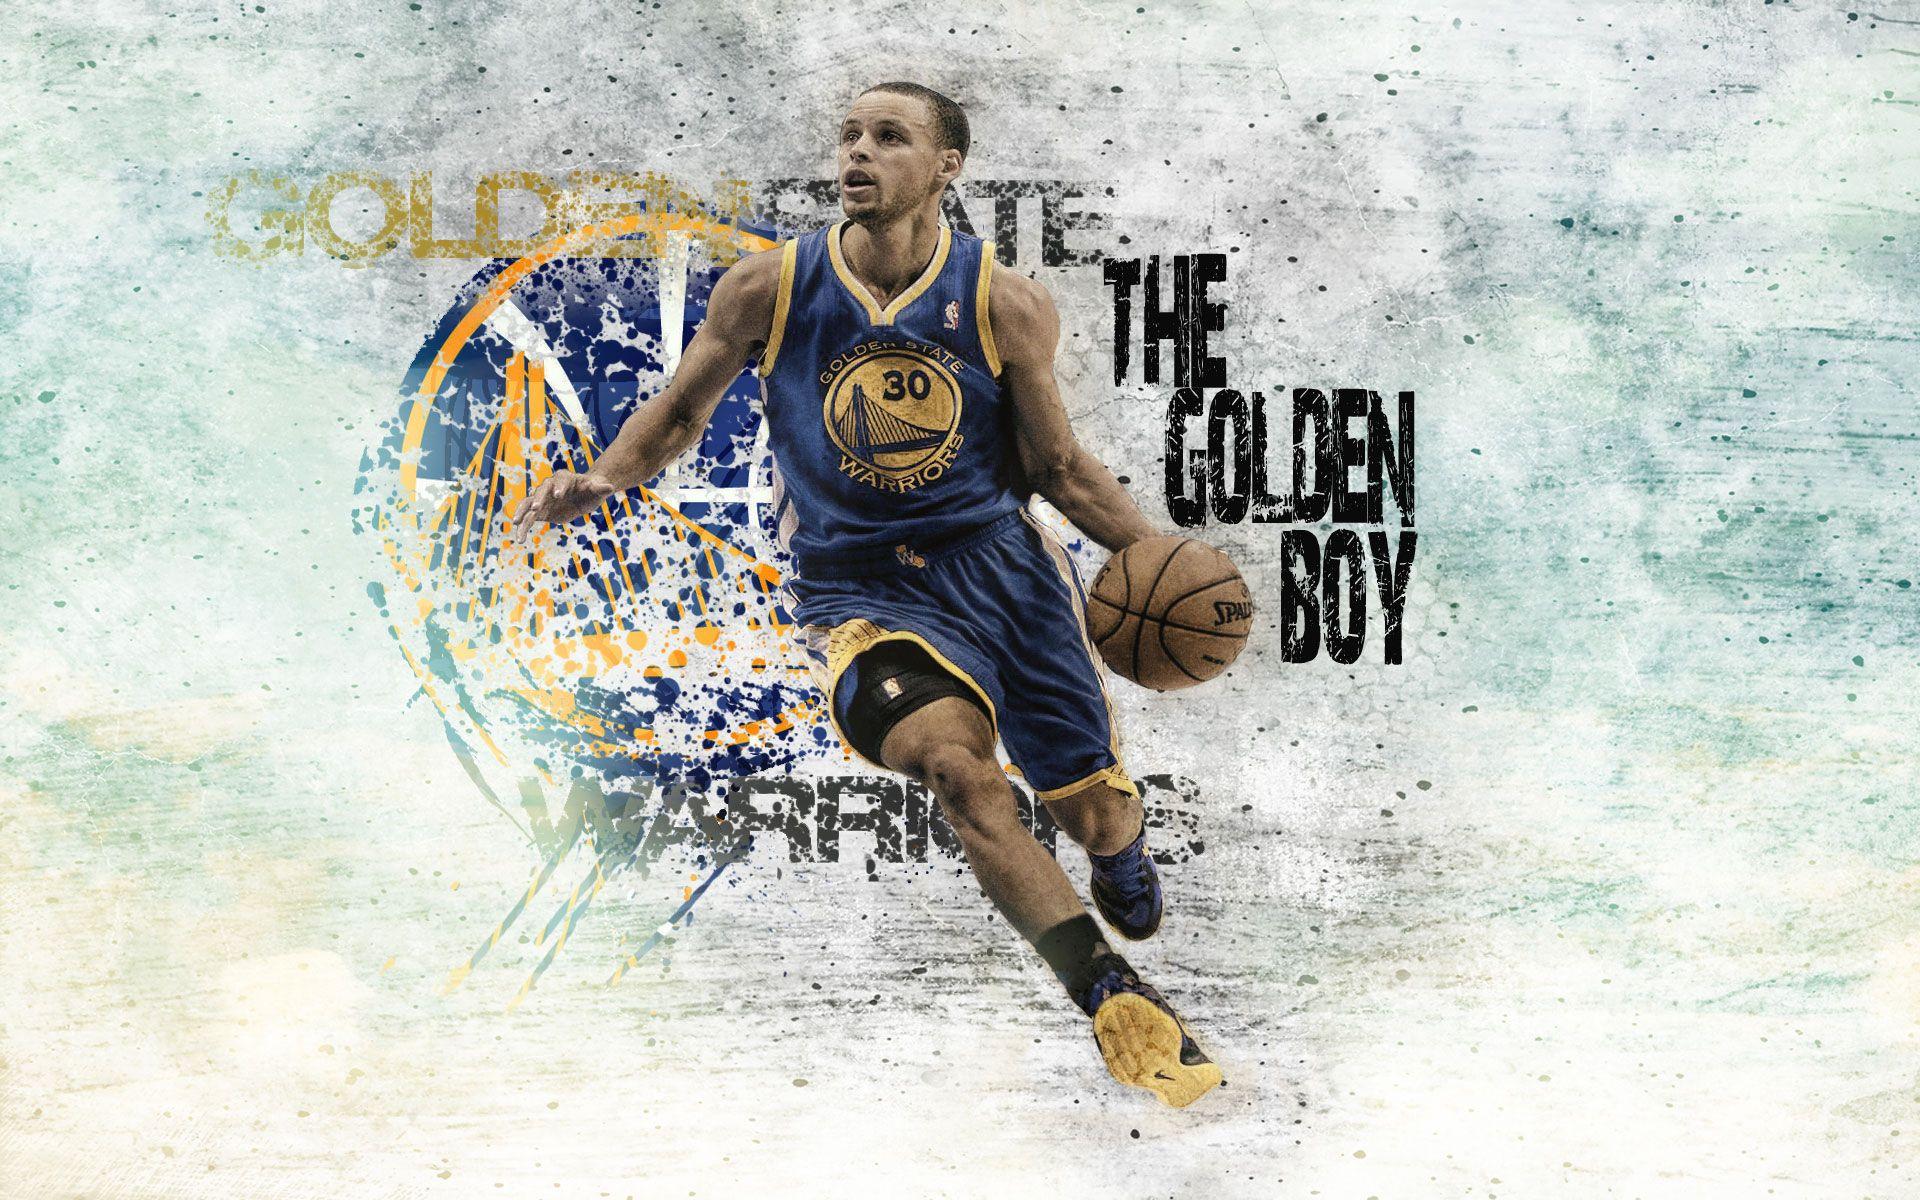 Stephen Curry Wallpaper HD for Basketball Fans